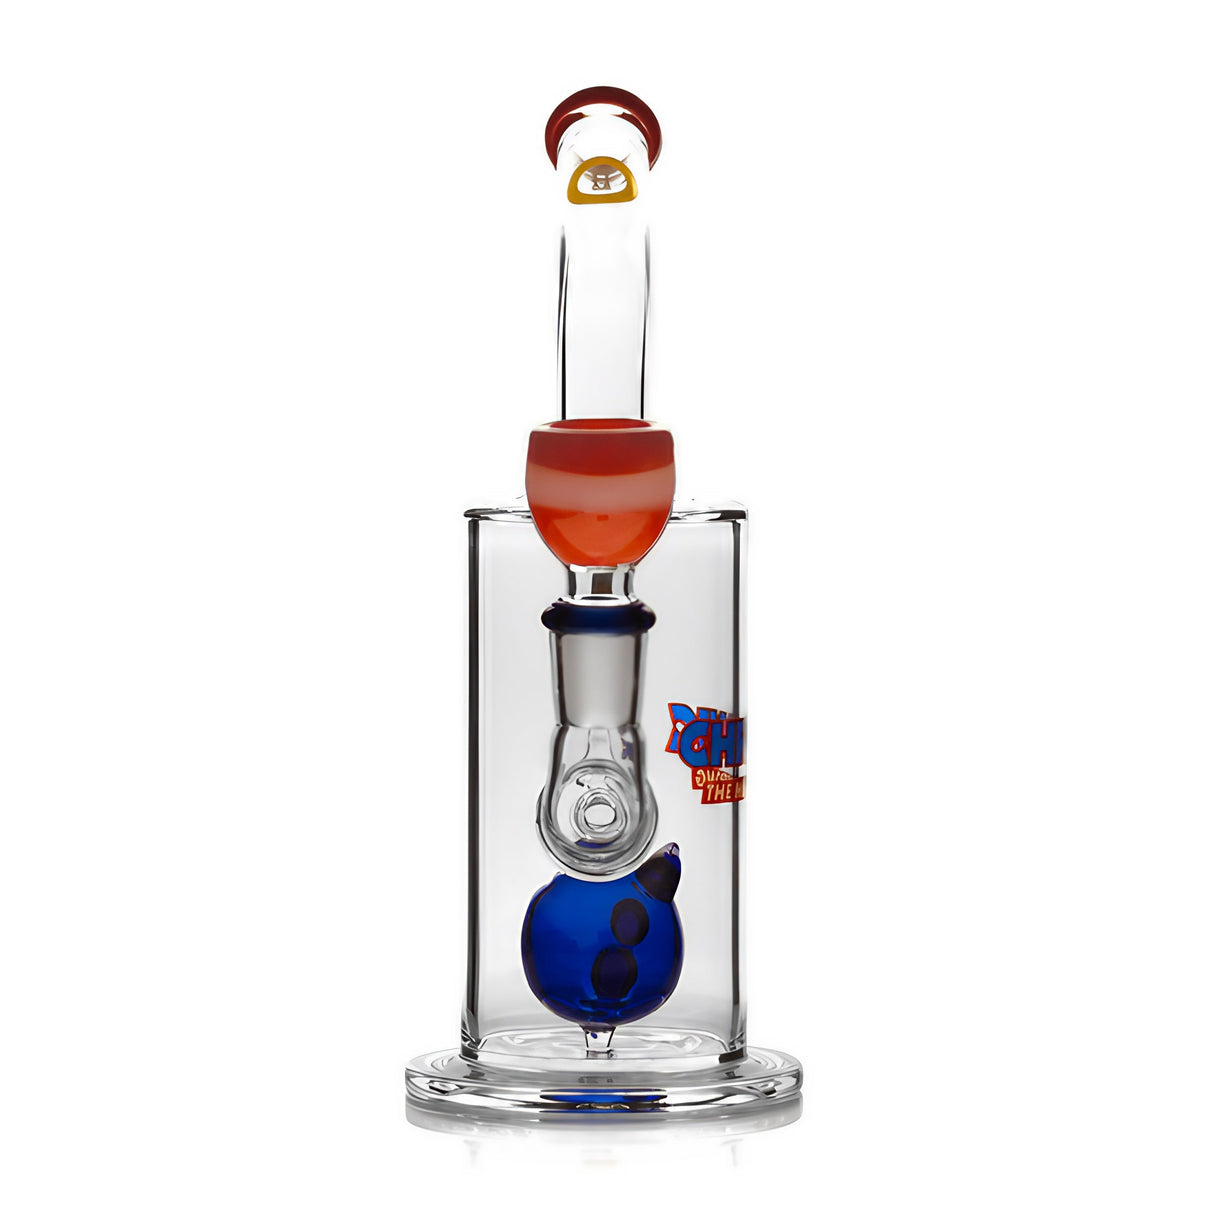 Hemper Chronic Bong front view with clear glass and blue accents, 7.5" tall, perfect for smooth hits